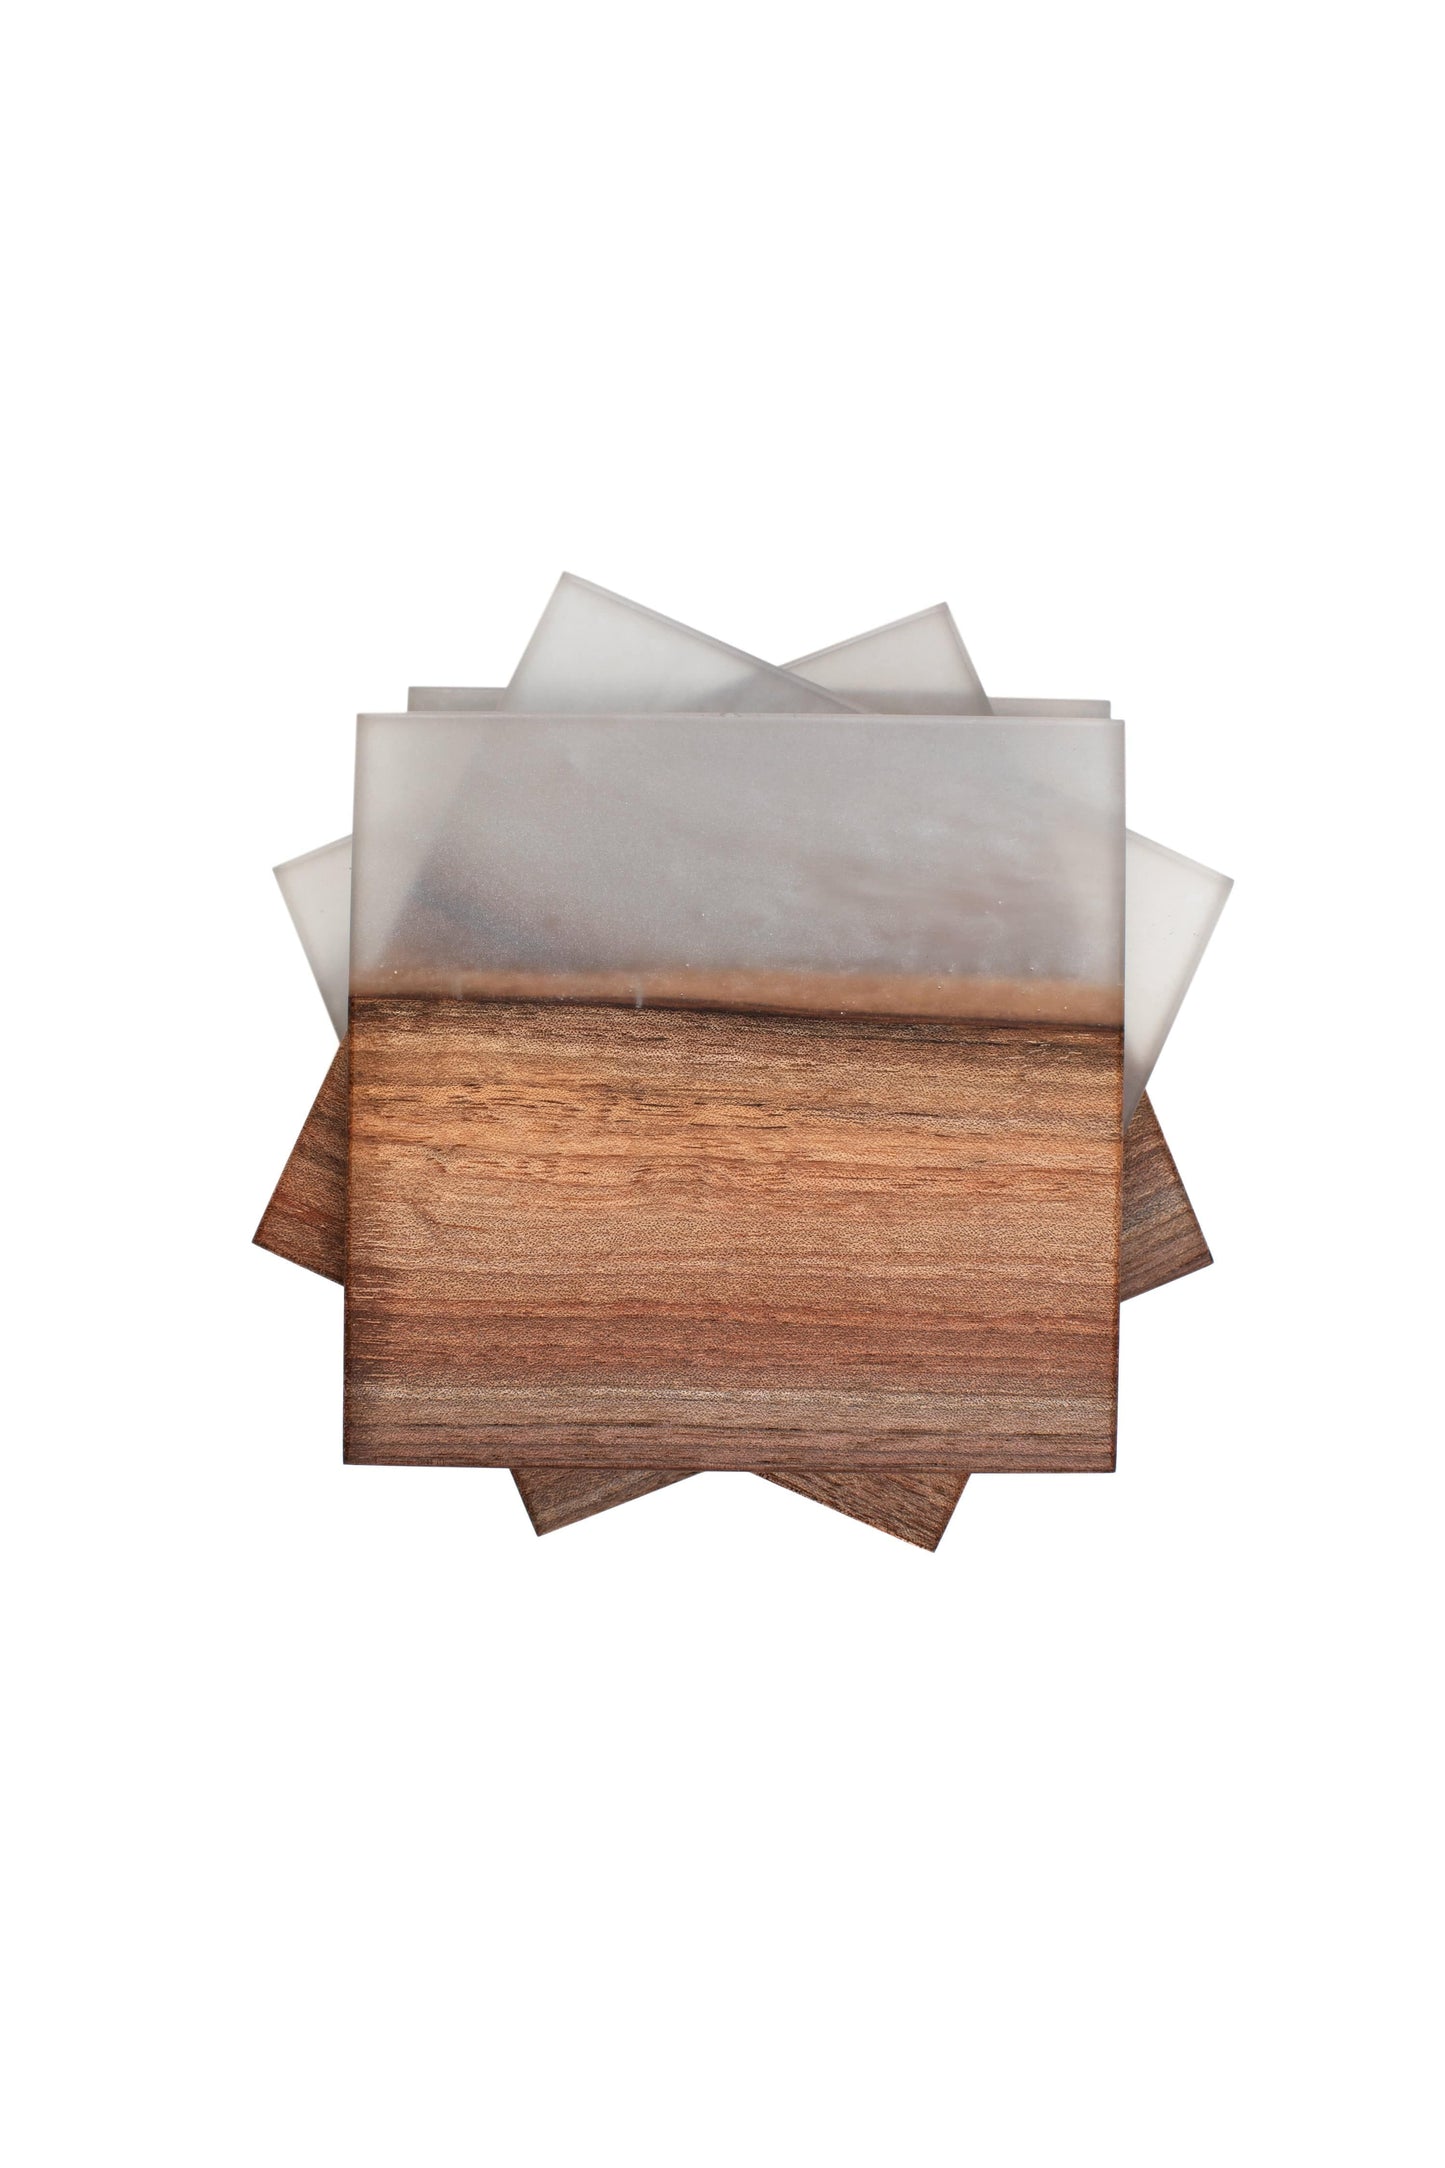 The Carpentry Shop Co., LLC Carpentry & Woodworking Black Walnut and Dolphin Epoxy Coaster Set